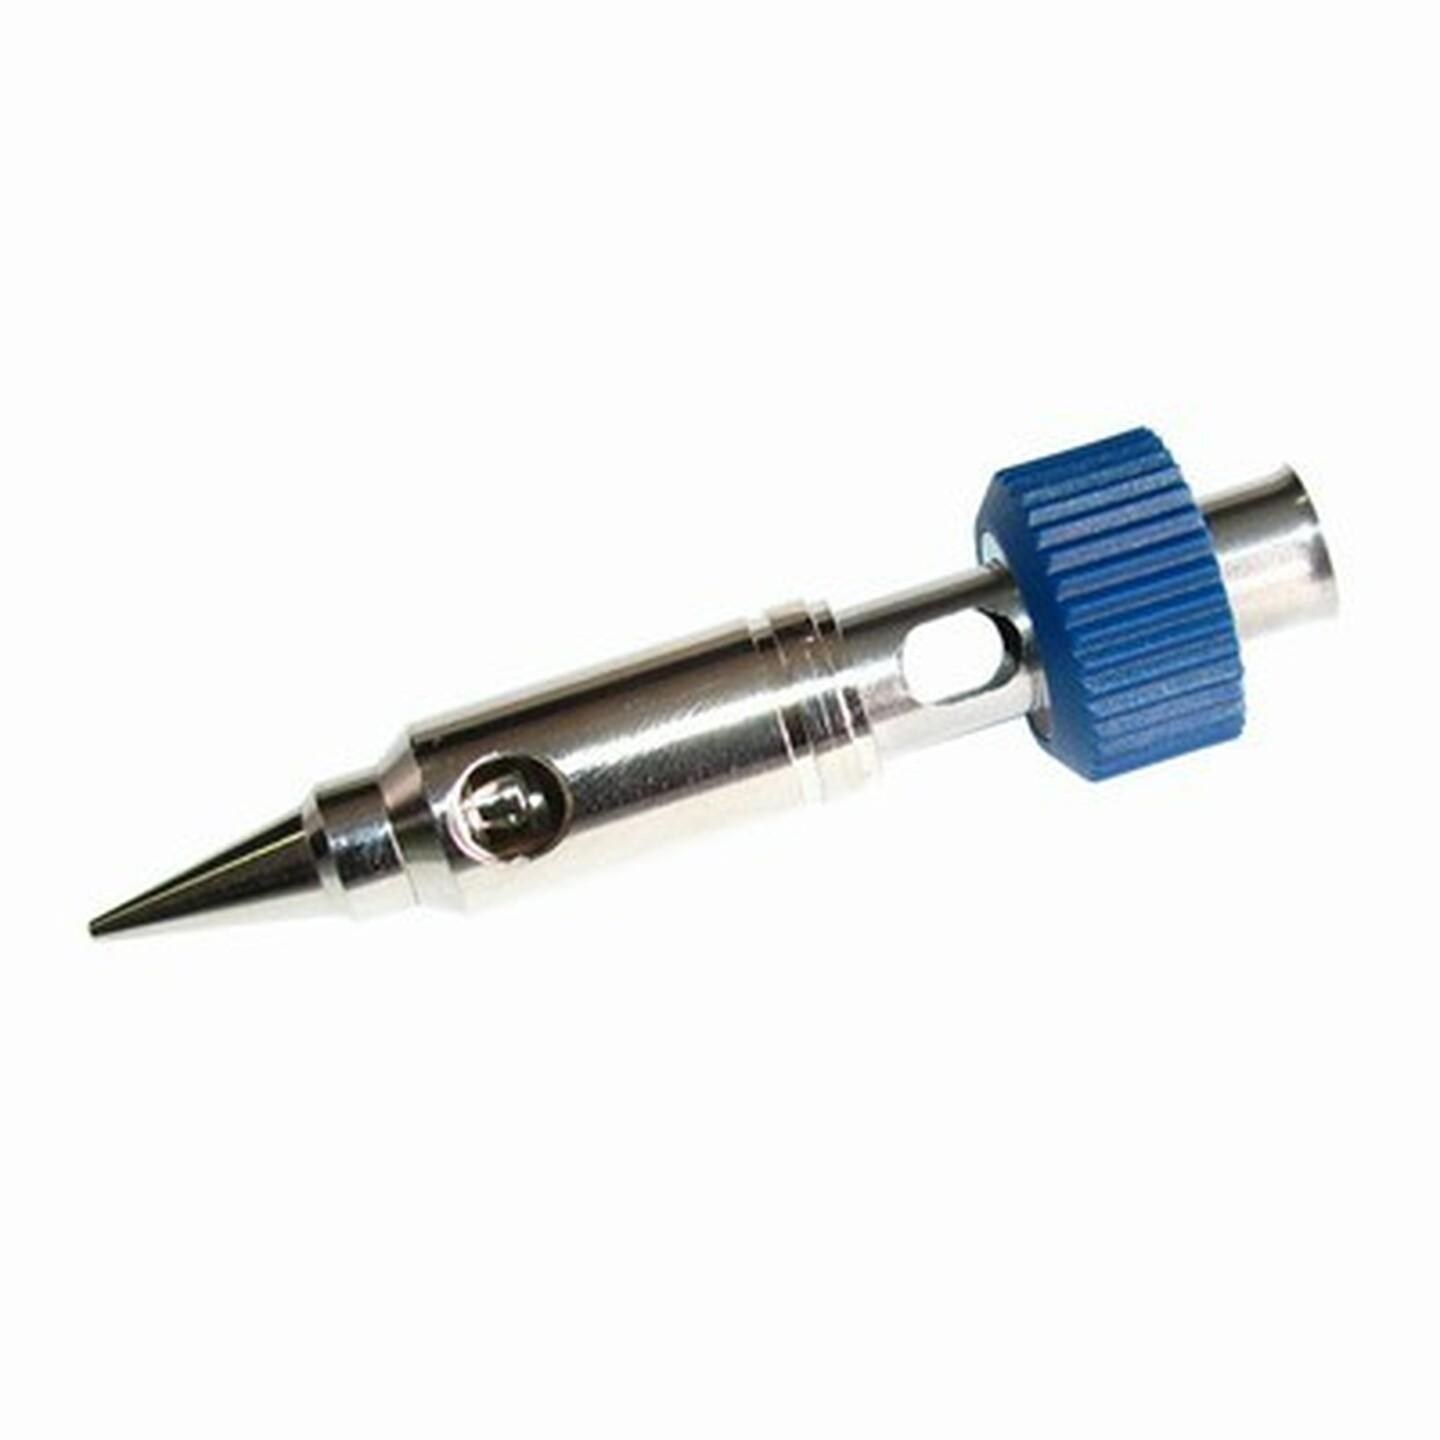 Spare Tip for TS1111 Soldering Iron.